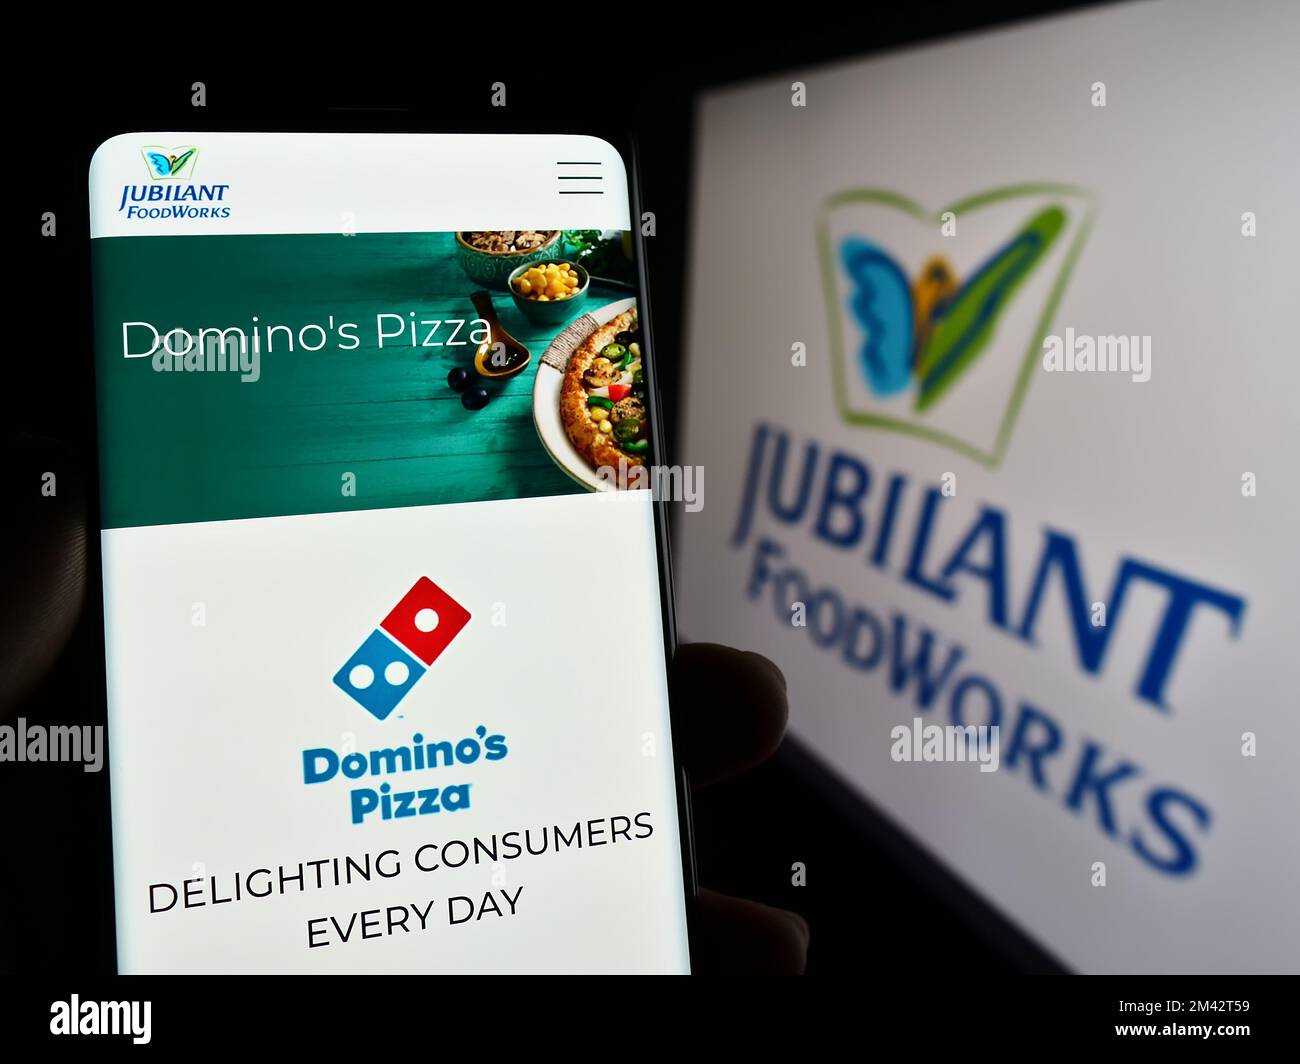 Person holding mobile phone with webpage of Indian food company Jubilant FoodWorks Limited on screen with logo. Focus on center of phone display. Stock Photo